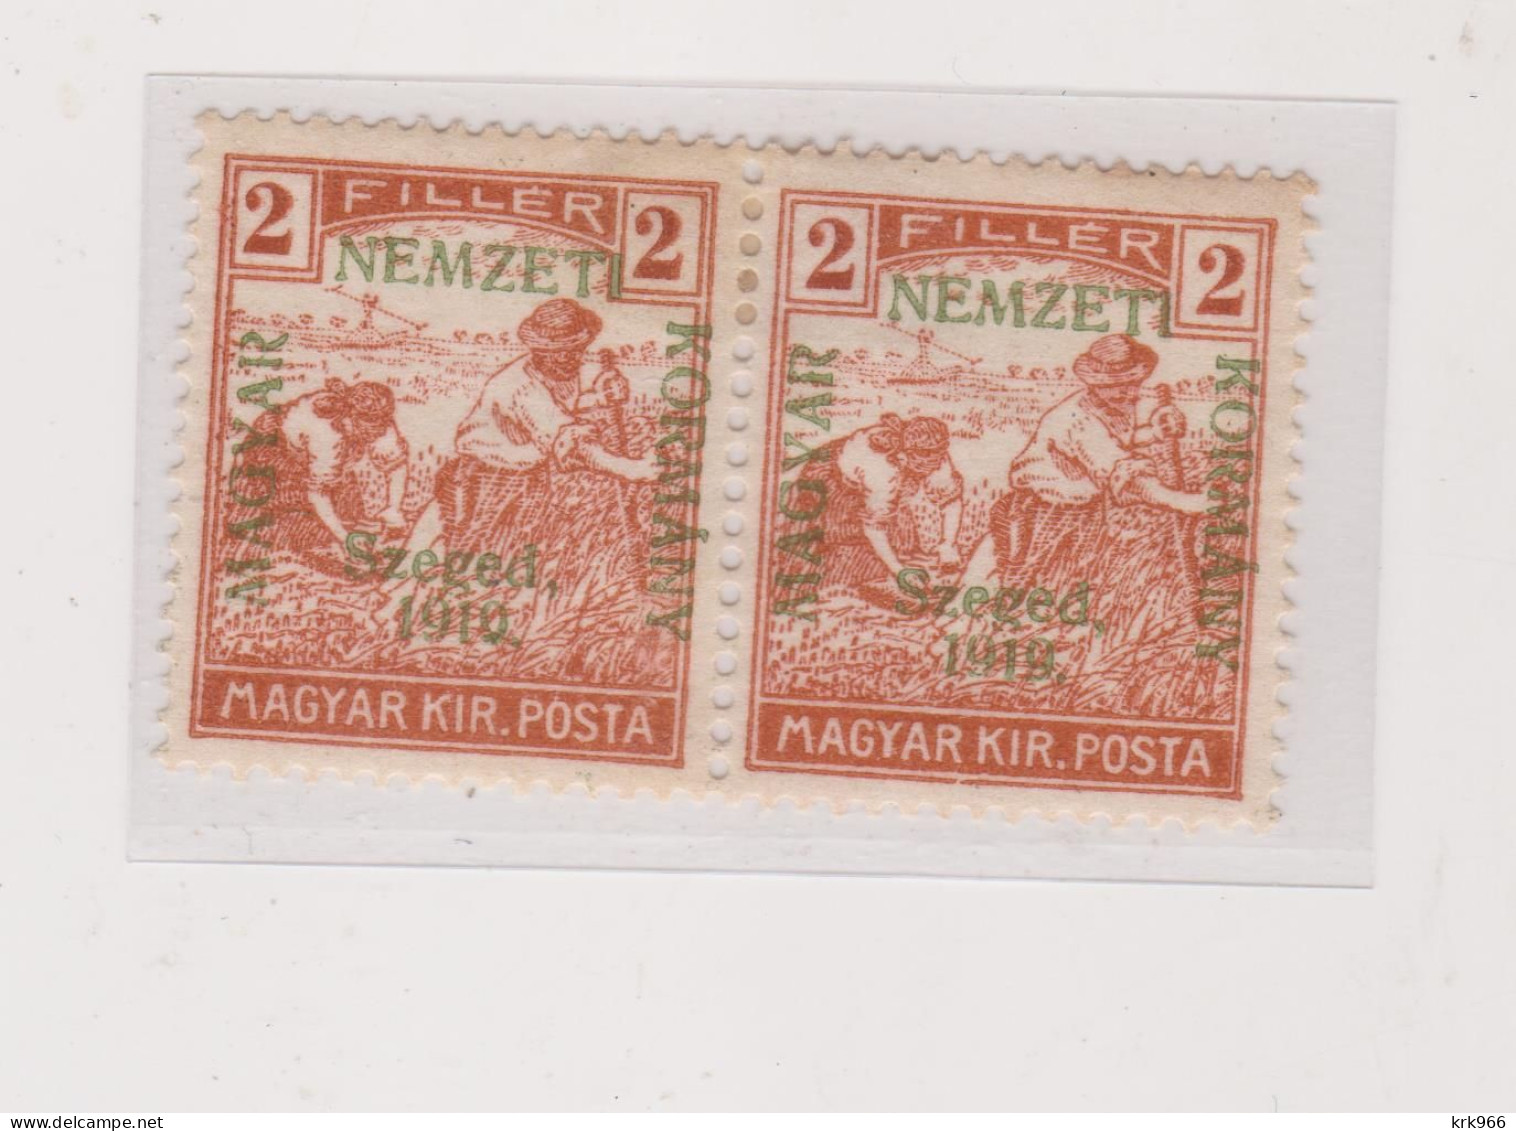 HUNGARY 1919 SZEGED SZEGEDIN Locals Mi 6 Pair  Hinged - Local Post Stamps